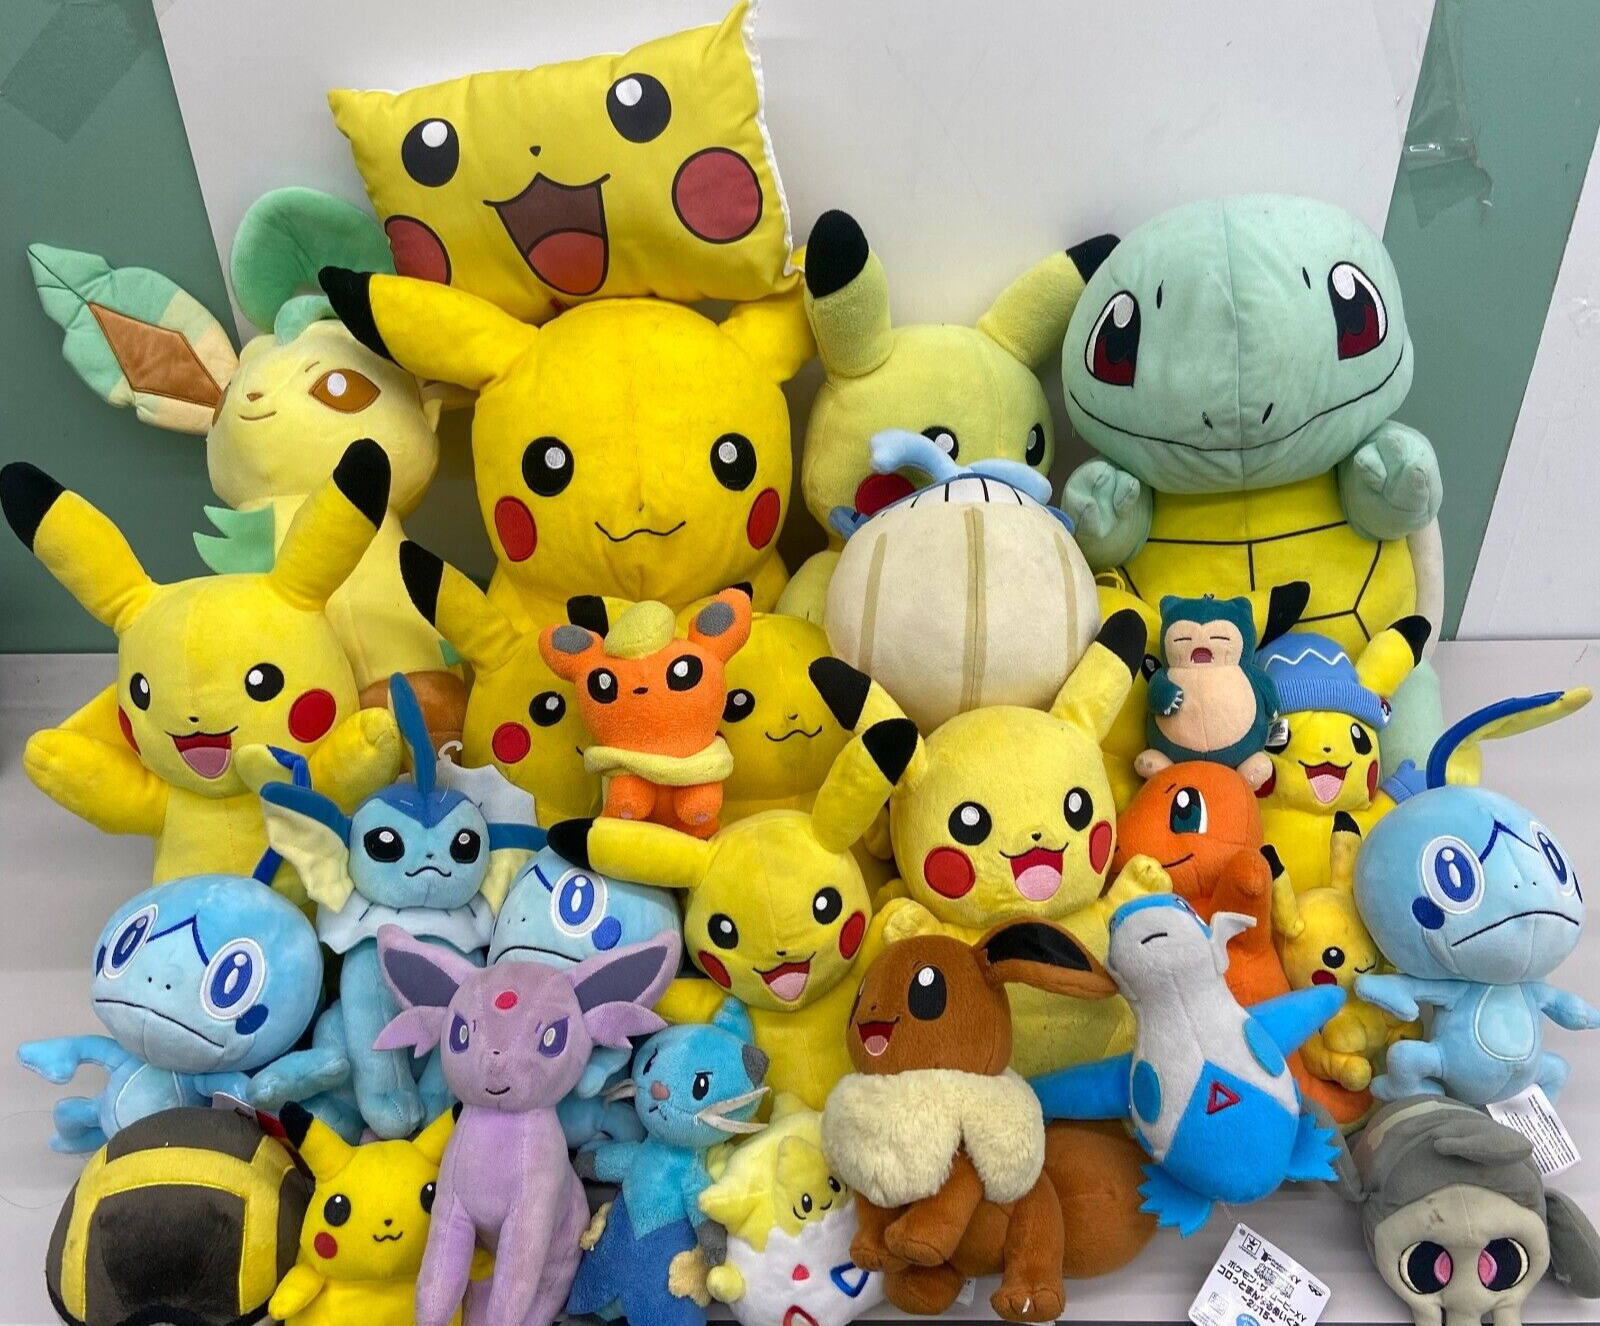 LOT of 29 Pokemon Plush Collectibles Toys Cute Pikachu Bulbasaur Squirtle Dolls